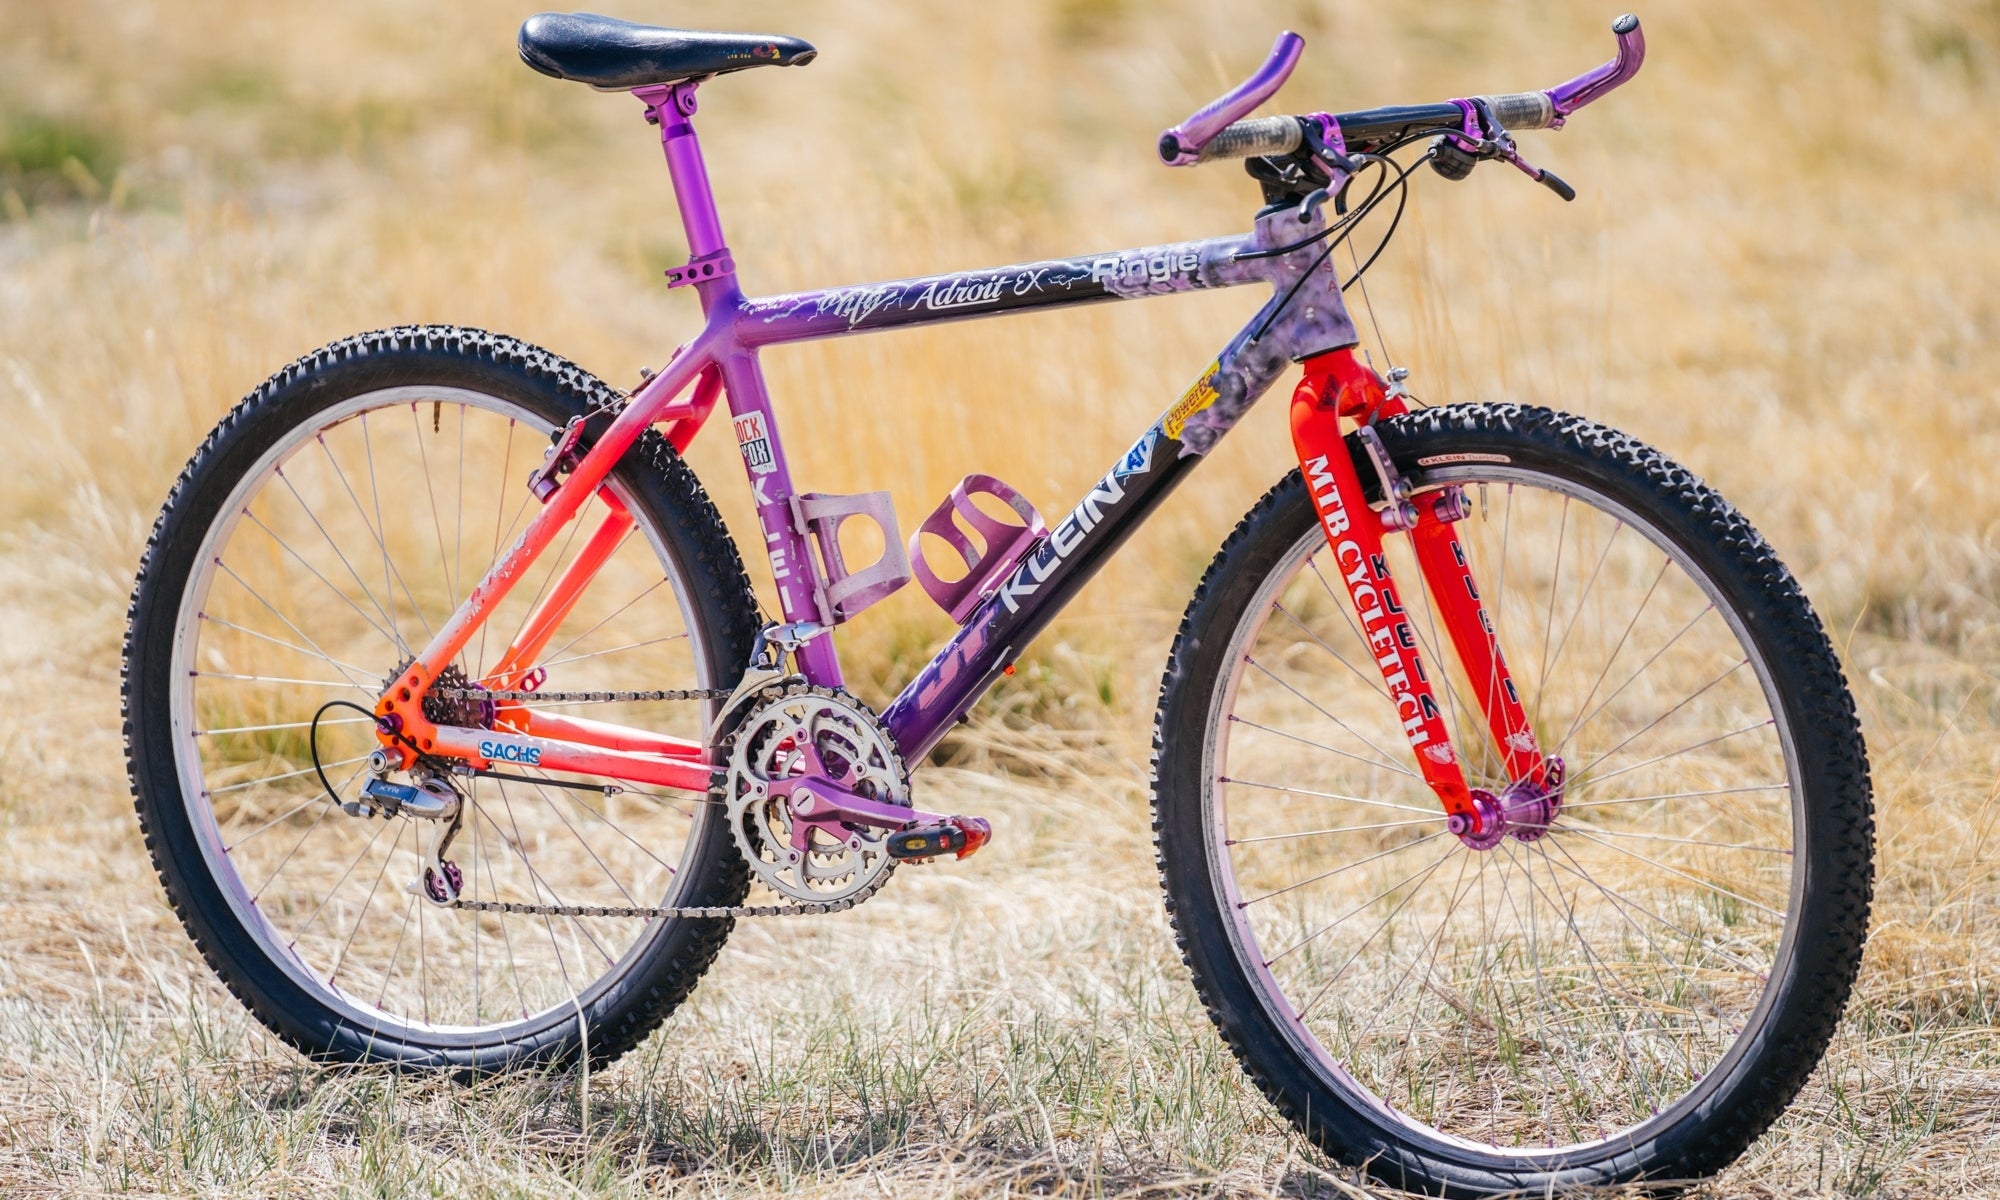 From the Vault: Tinker's Jaw-Dropping Klein Adroit EX MTB | The 